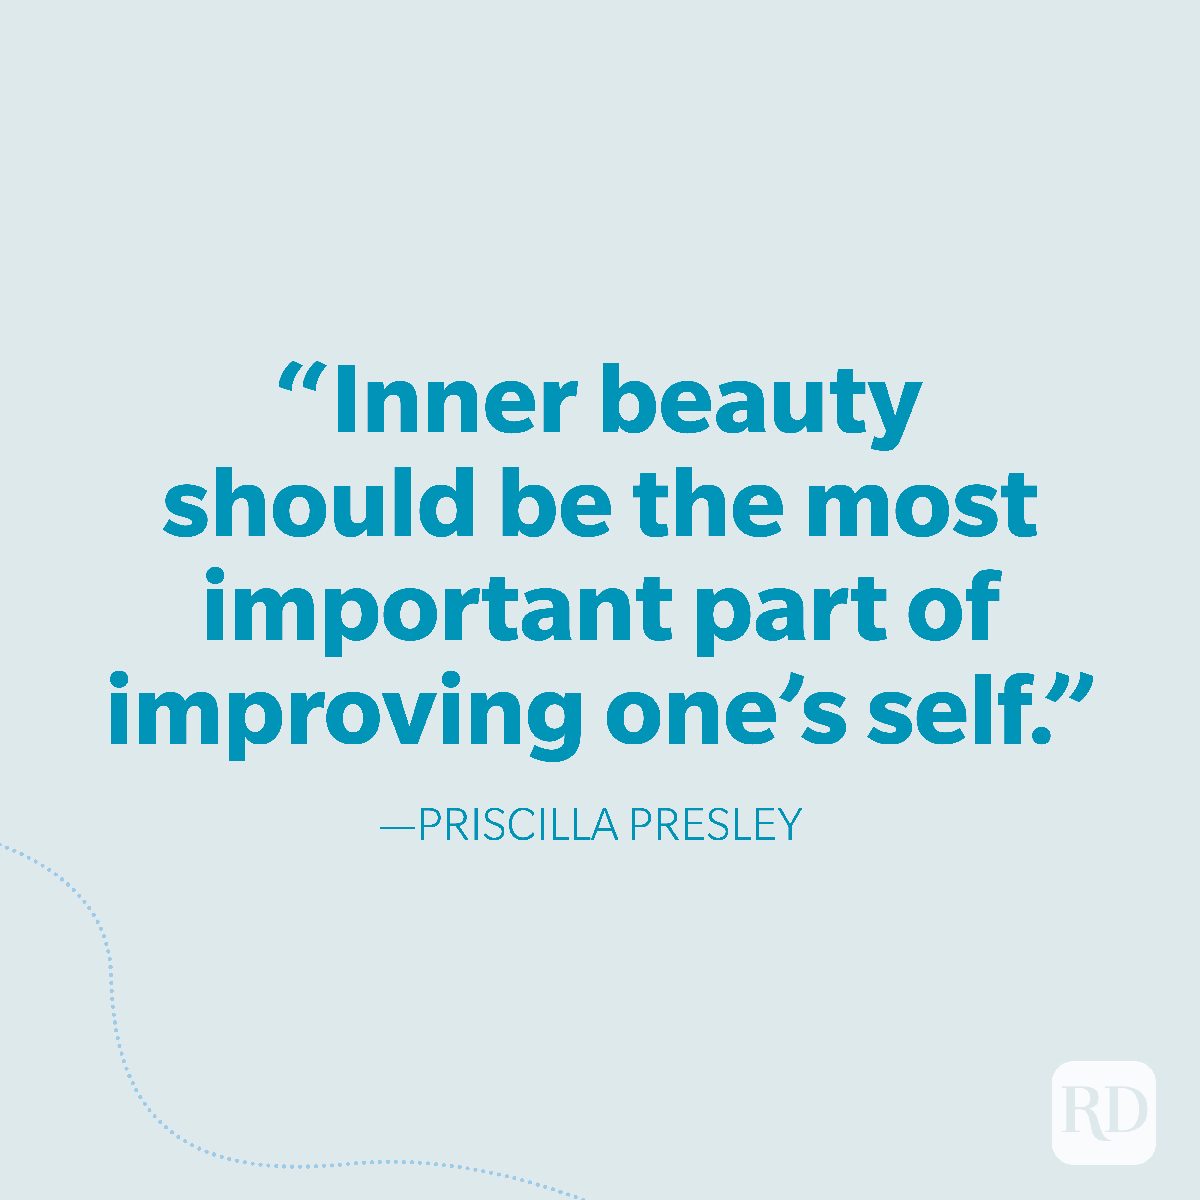 34-Inner beauty should be the most important part of improving one's self